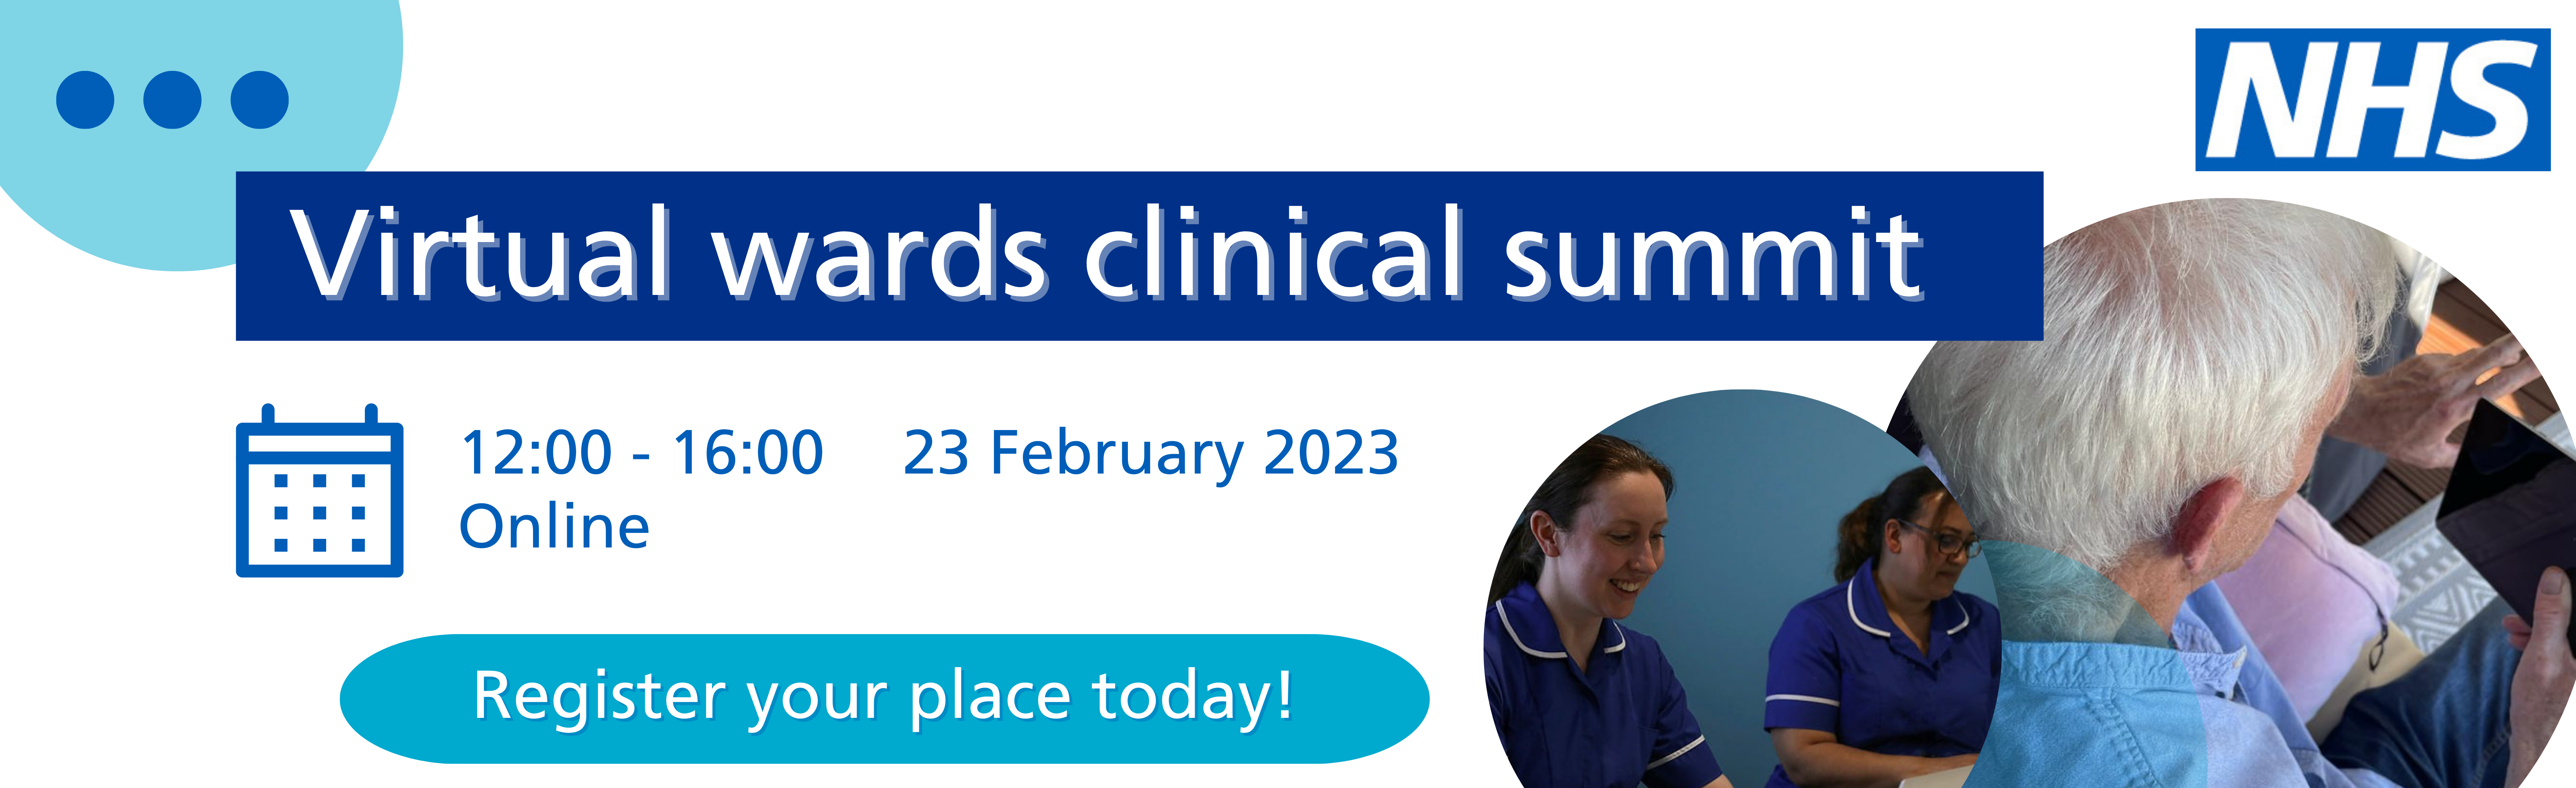 Virtual wards clinical summit banner. Register for the summit by visiting https://www.events.england.nhs.uk/events/virtual-ward-clinical-summit